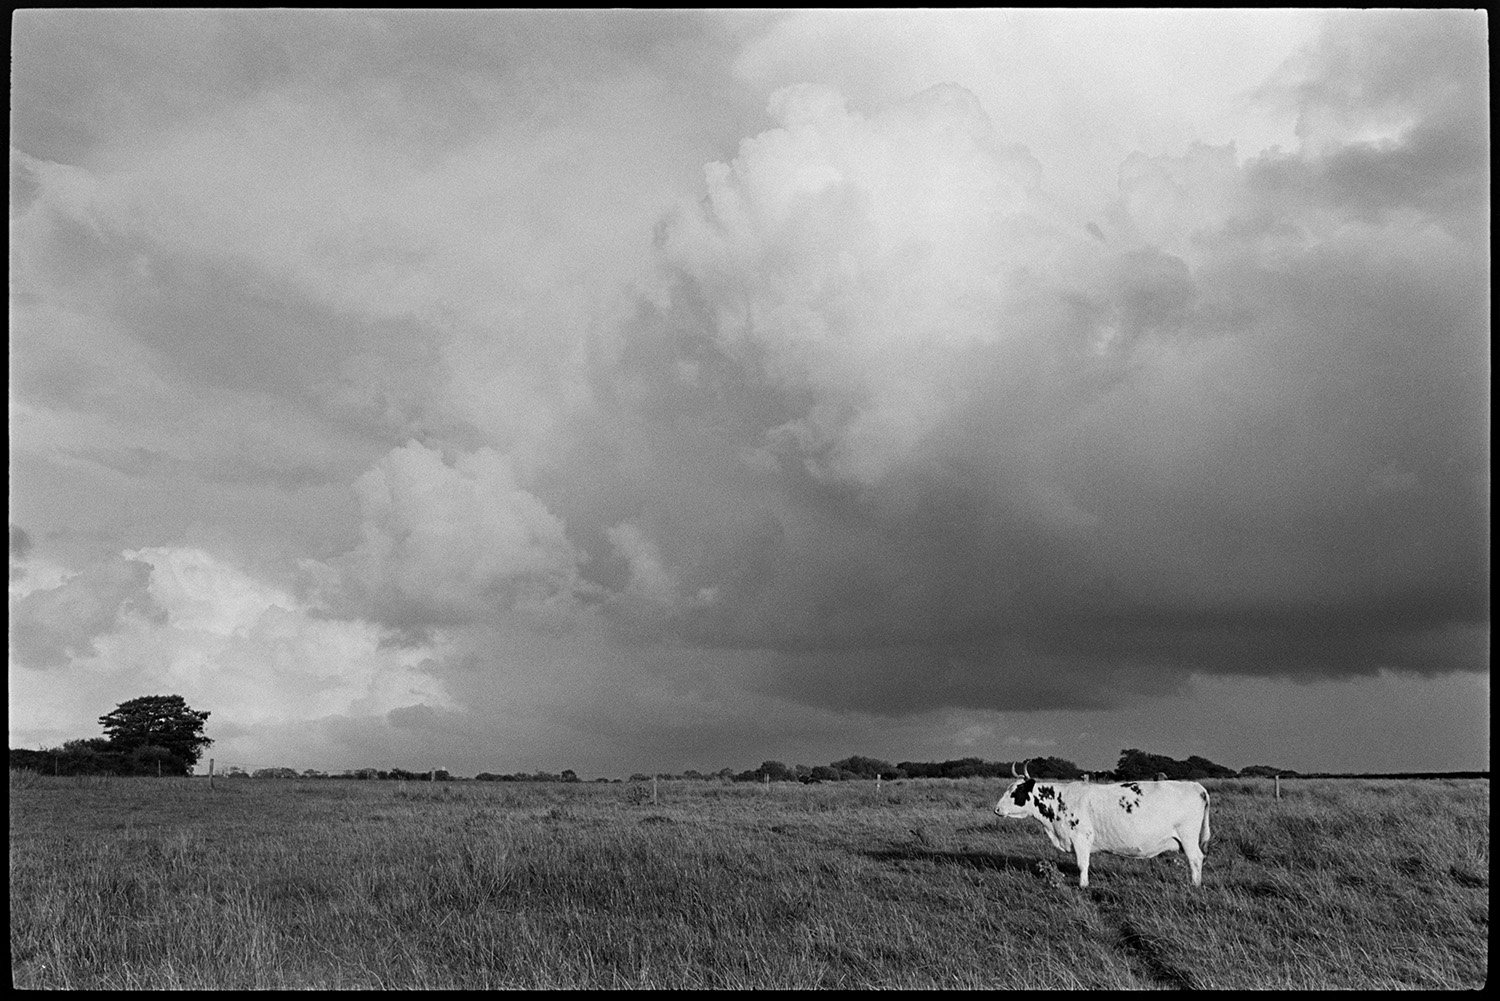 Cloudy landscape with geese and white cow. 
[A mostly white cow with horns stood in a field at Cuppers Piece, Beaford. Clouds can be seen in the sky above.]